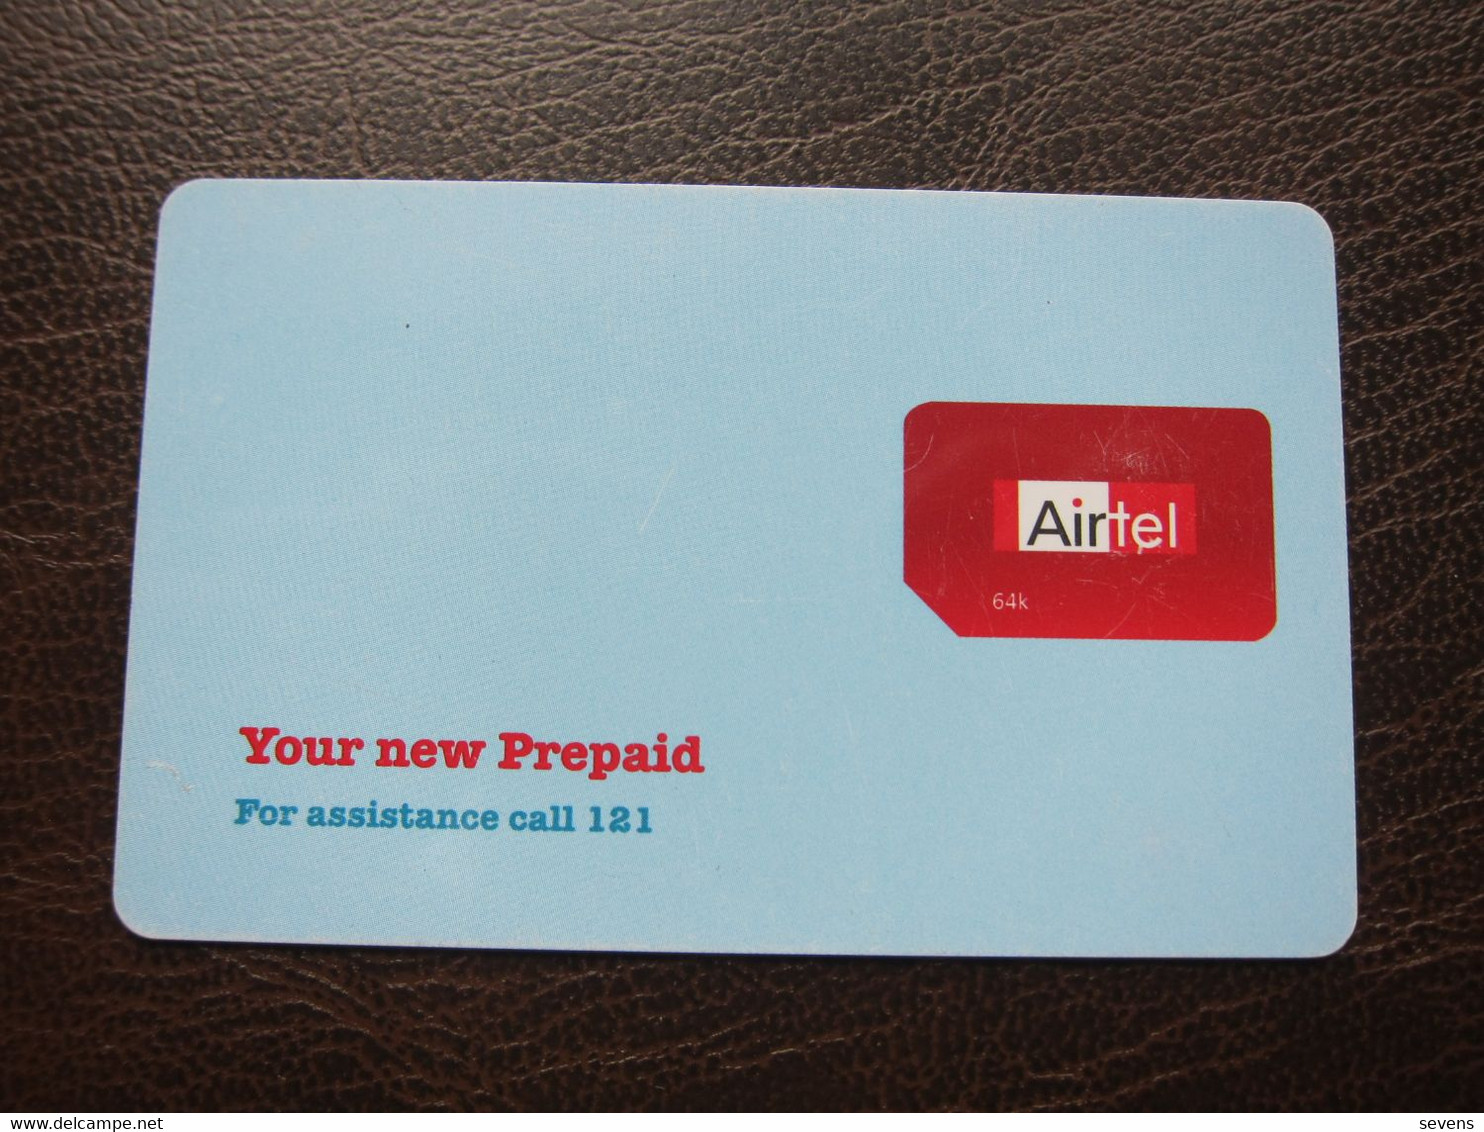 Airtel 64K GSM SIM Card, Sample Card Without Account Number, With Scratchs, Chip Moudle Wrong Cut - India